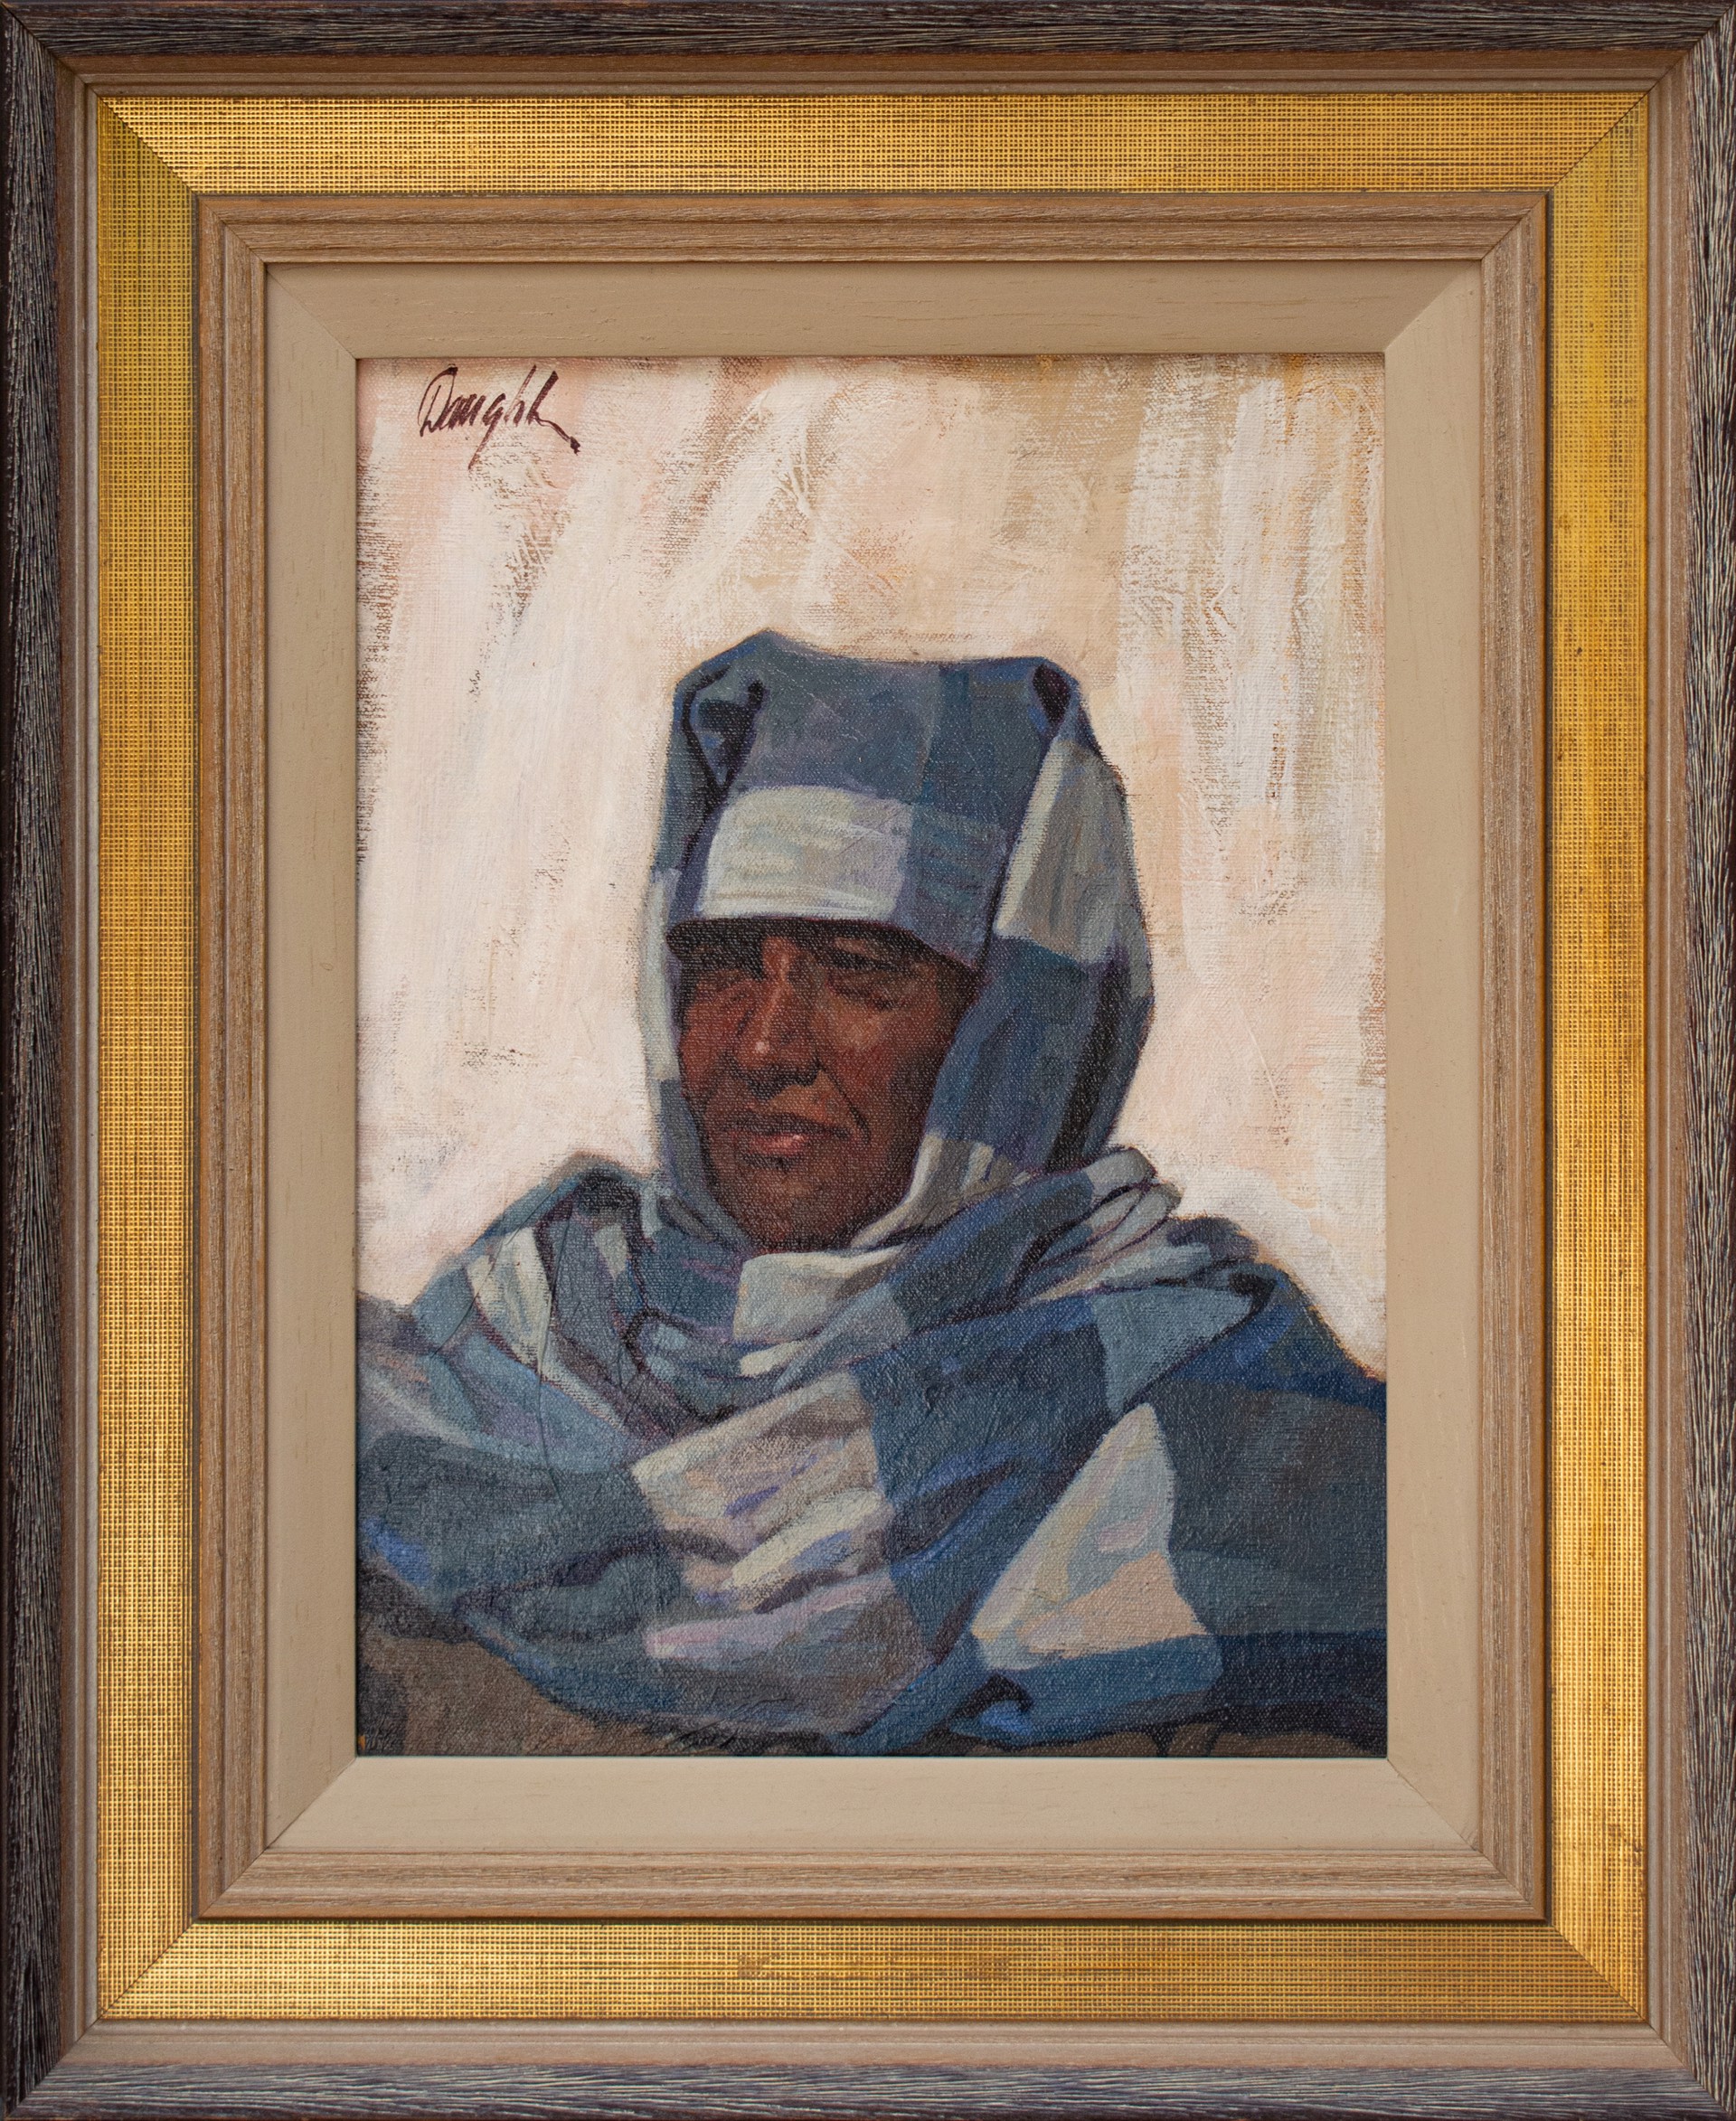 Robert Daughters (1929-2013), Taos Indian by Secondary Offerings